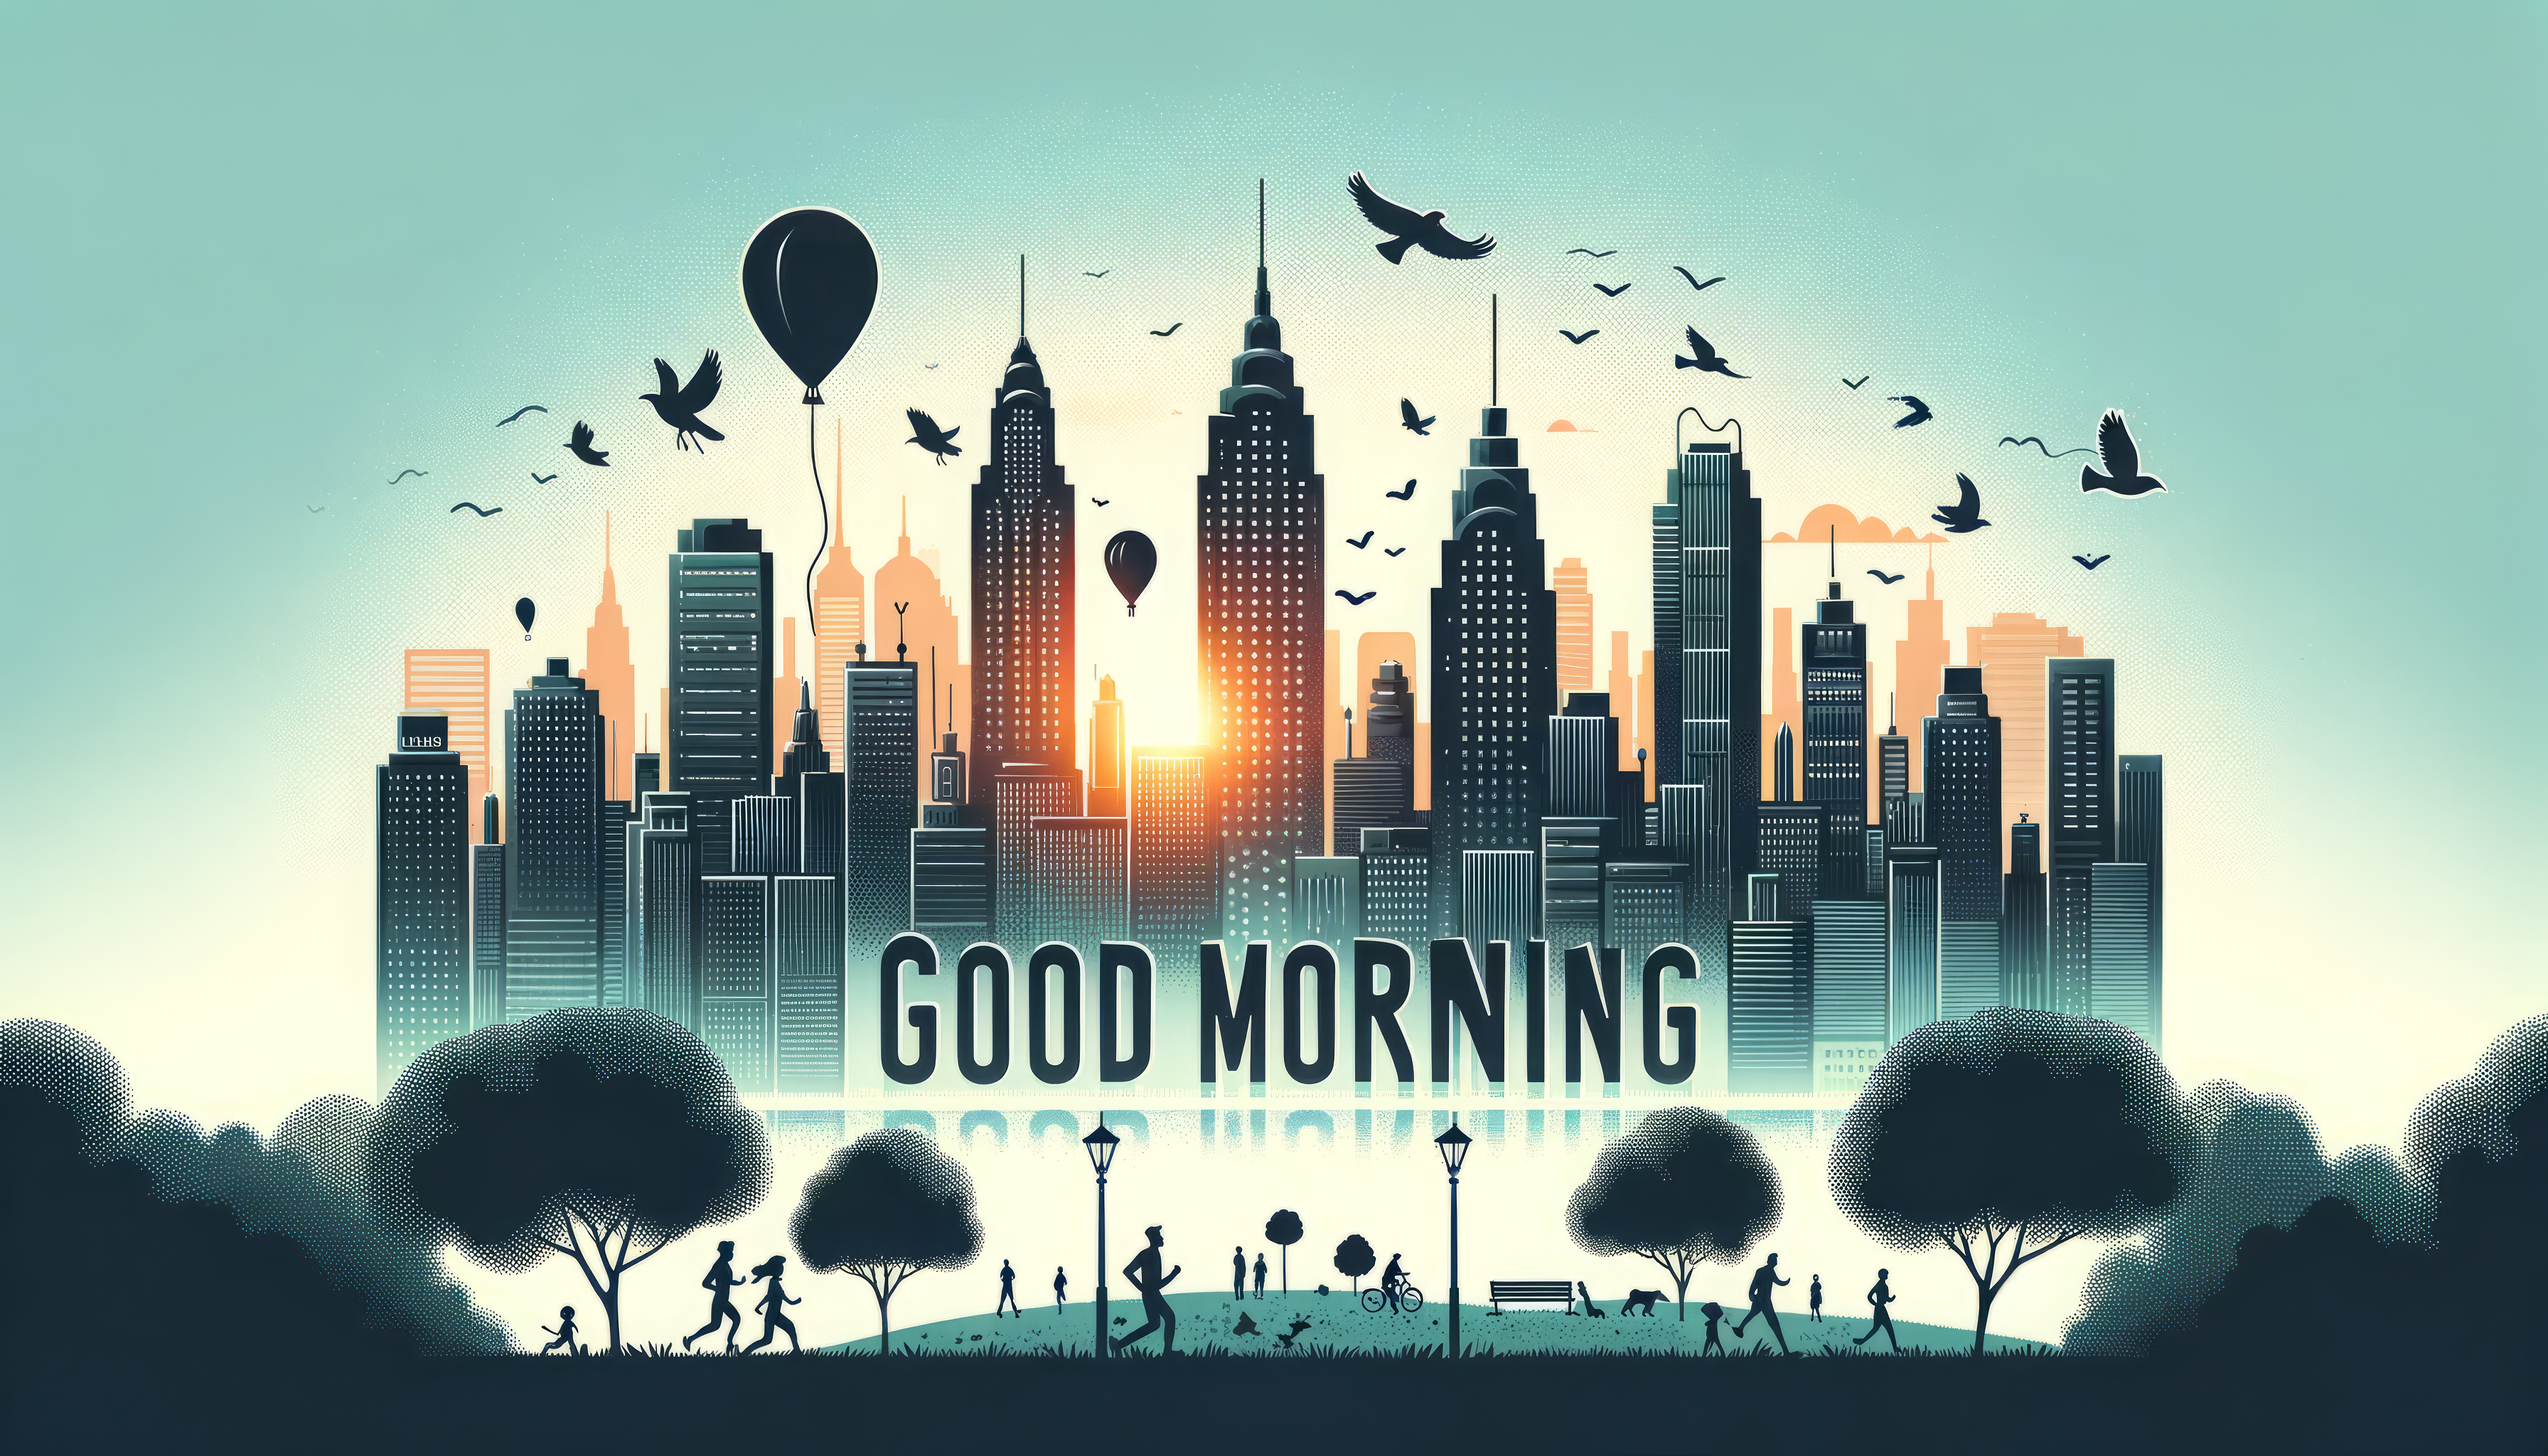 Inspirational Good Morning cityscape wallpaper with a sunrise, silhouette skyline, birds, hot air balloon, and people engaging in morning activities.